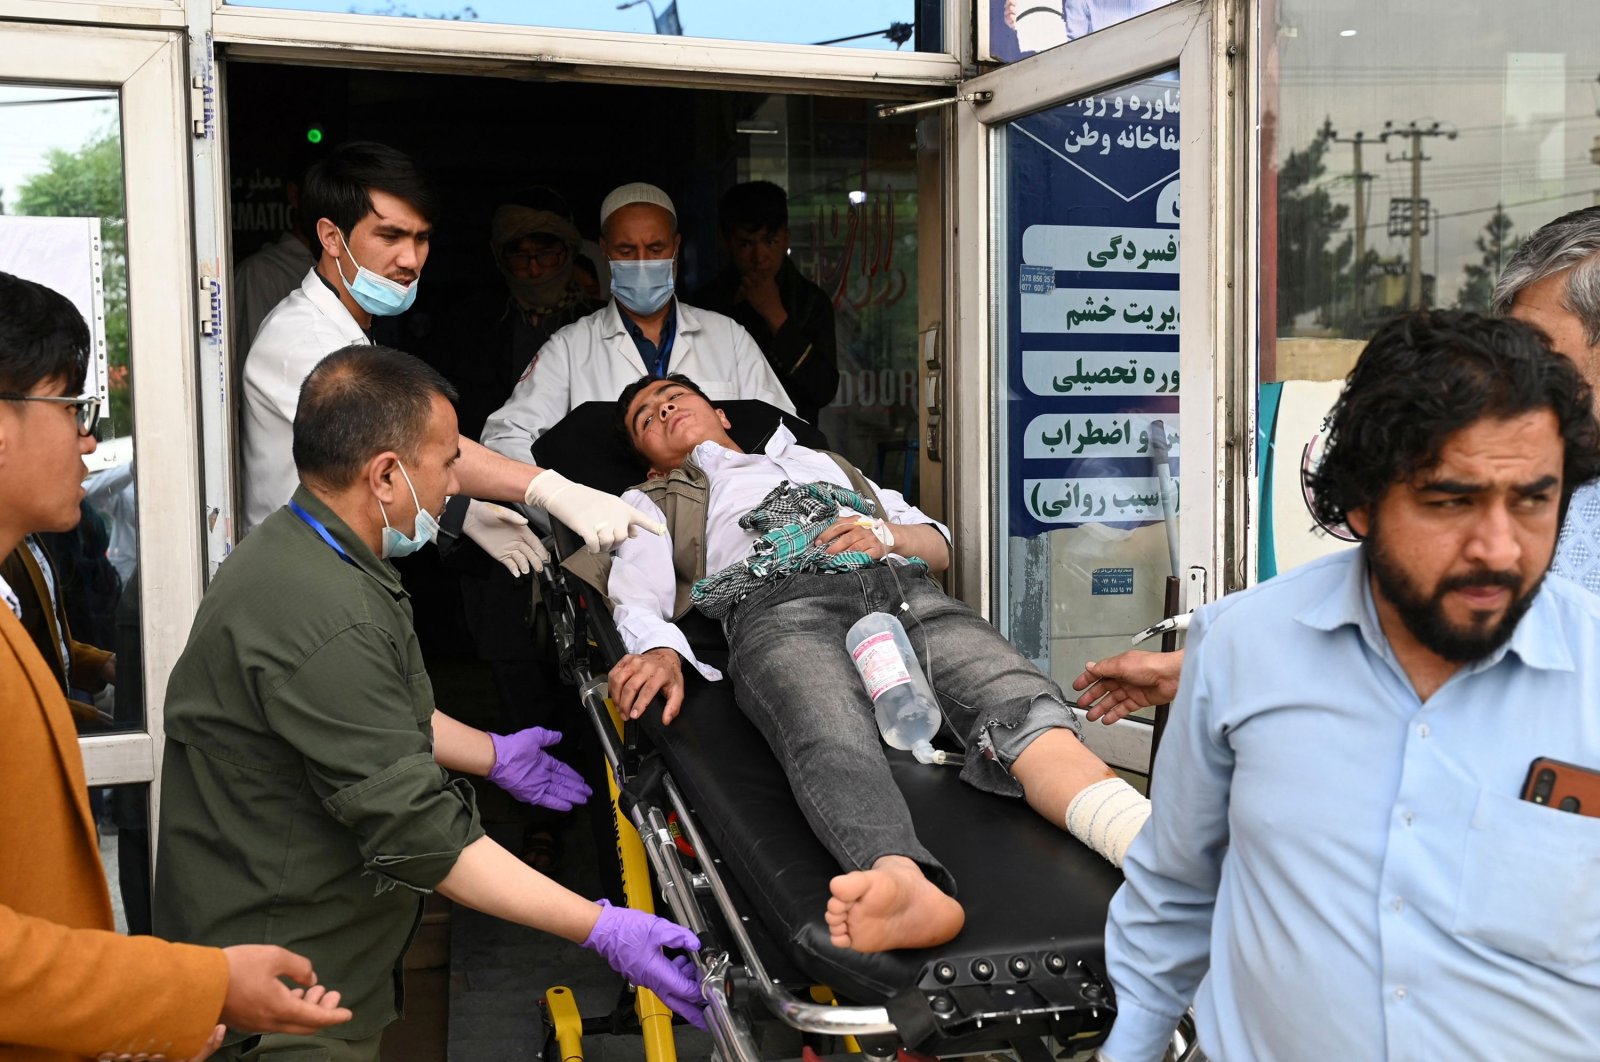 Medical staff move a wounded youth on a stretcher inside a hospital, Kabul, Afghanistan, April 19, 2022. (AFP Photo)